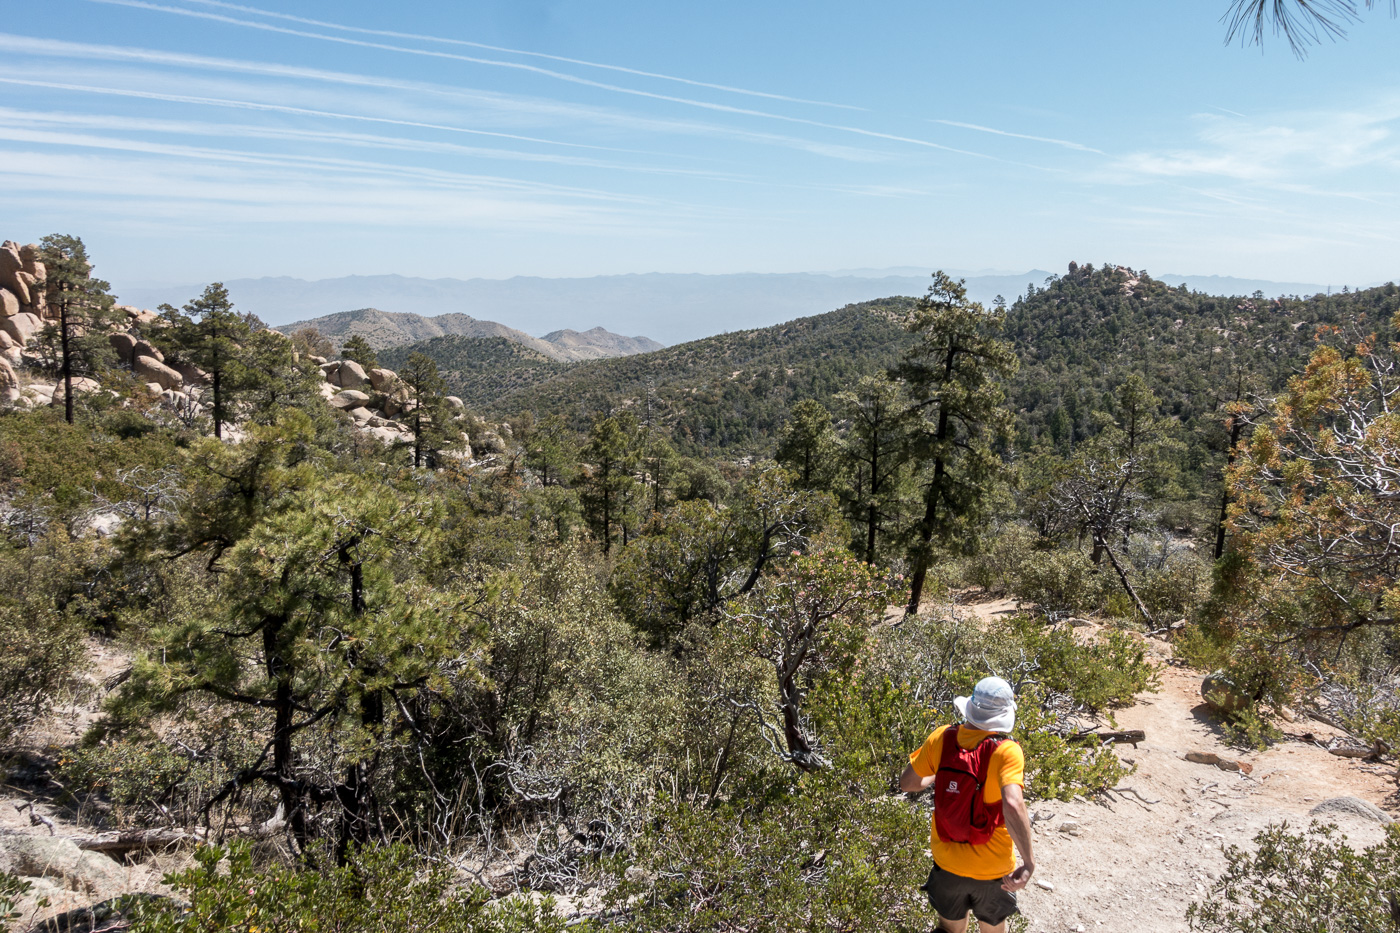 Running an upper section of the trail - the Brush Corral Trail is easy to follow and in decent shape down the junction with the Brush Corral Shortcut Trail. April 2017.